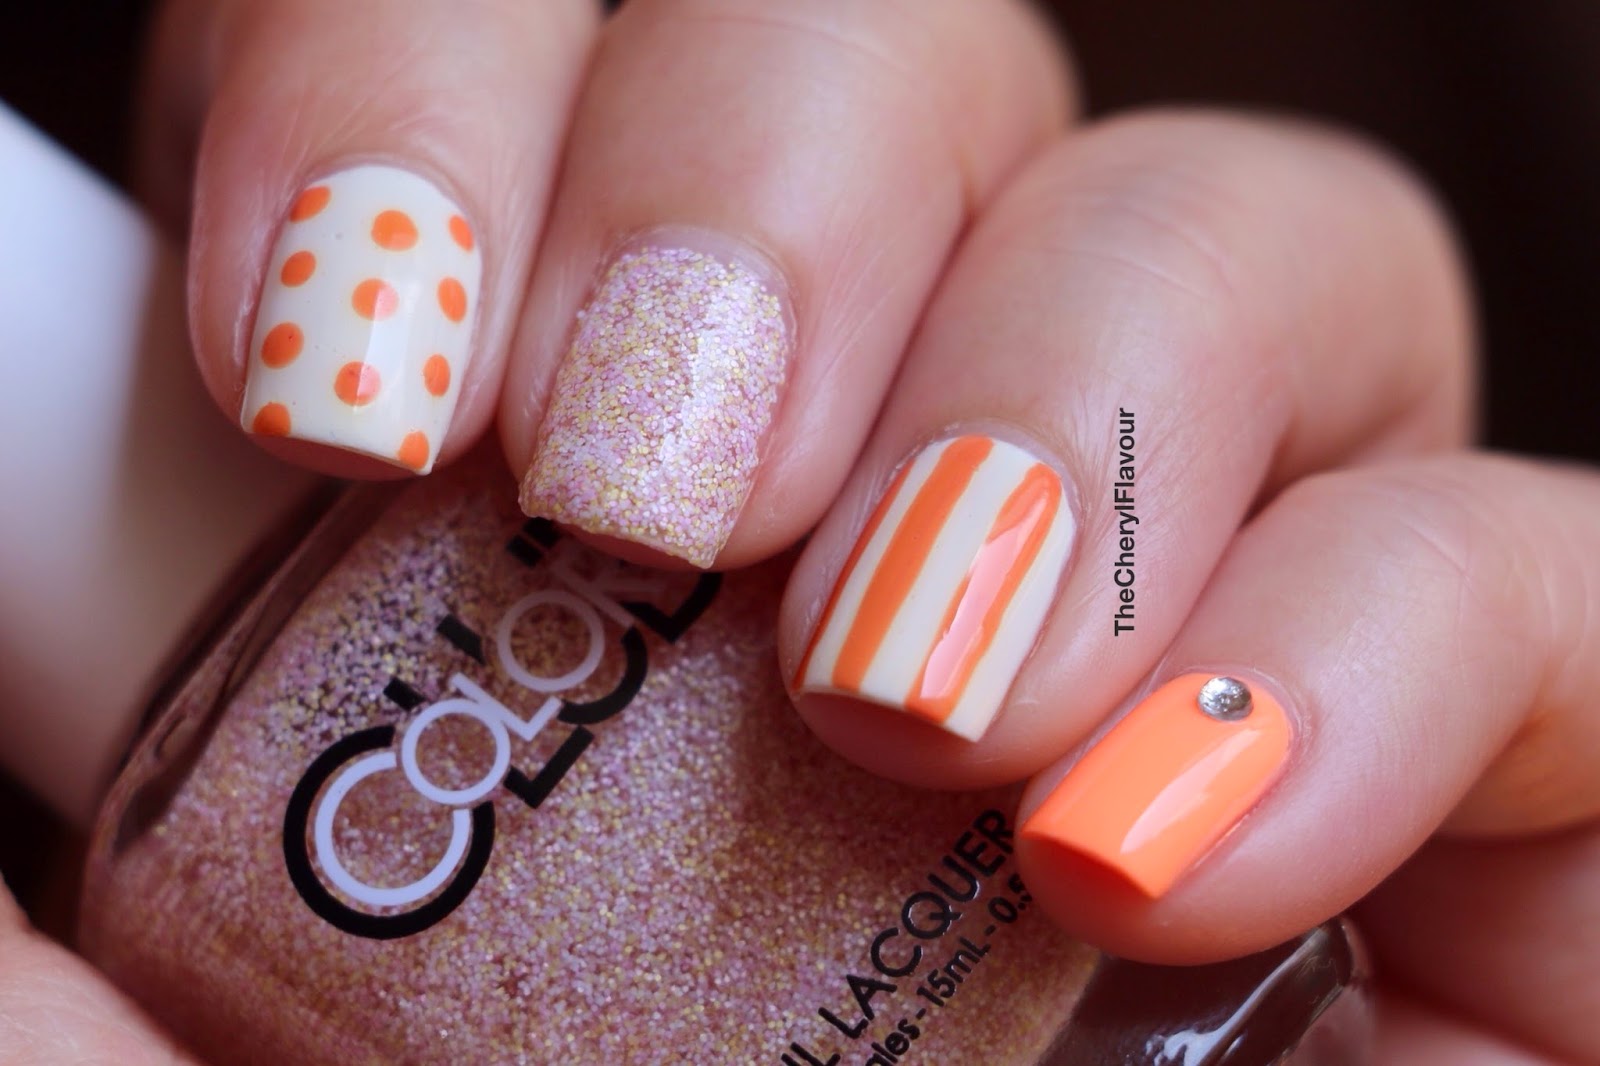 The Cheryl Flavour: Orange themed nails!